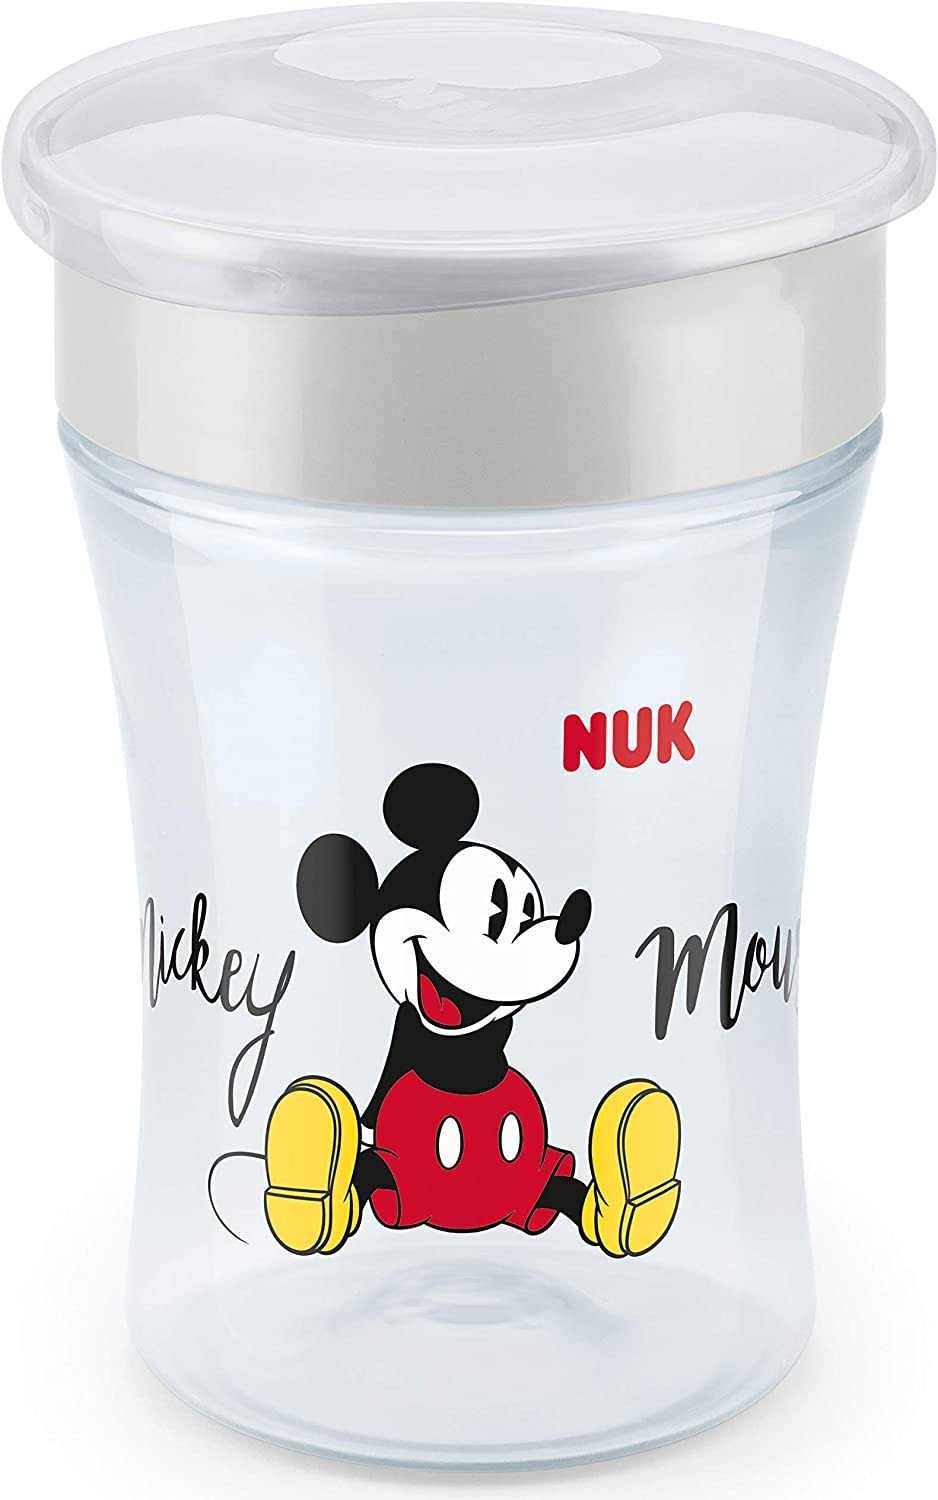 Nuk Magic Cup Disney Sippy Cup, 8+ Months, 360 Degree Anti-Spill Rim, BPA-Free, 230 mL, Mickey Mouse, with Lid